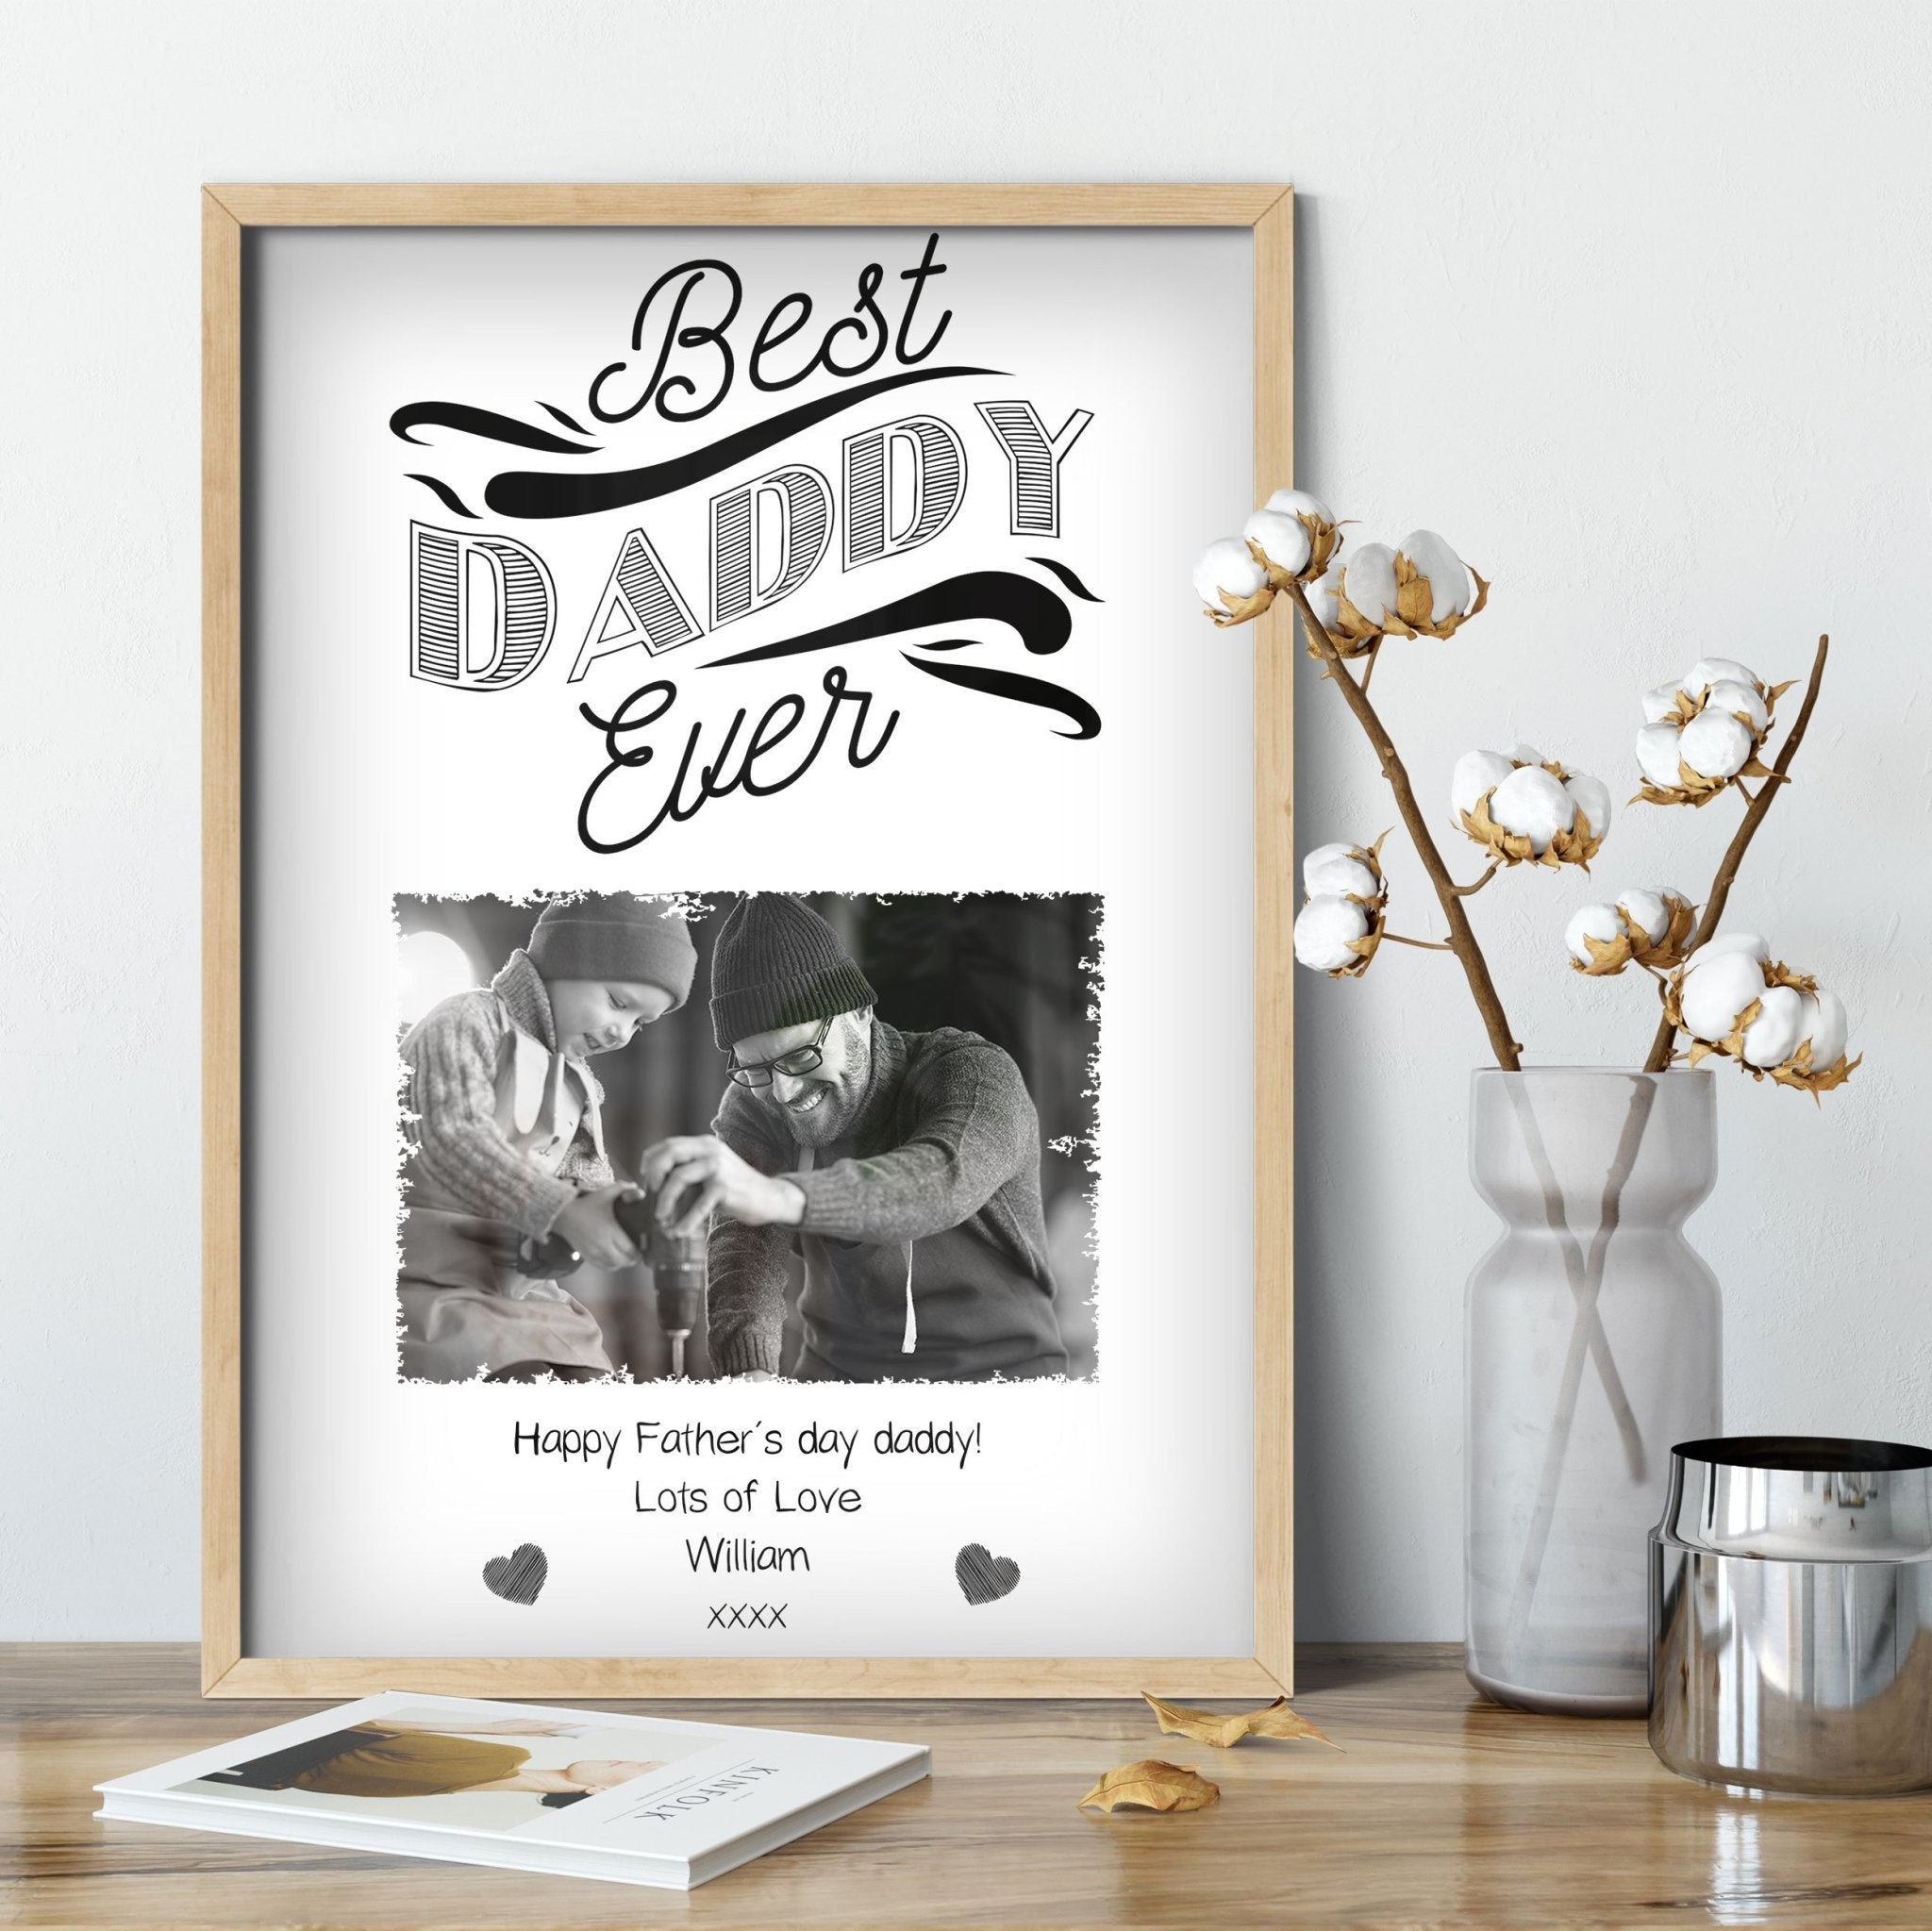 Custom Photo Print | Father's Day Quote Gift | Dad Gift Idea Normal Frame - UniquePrintsStore